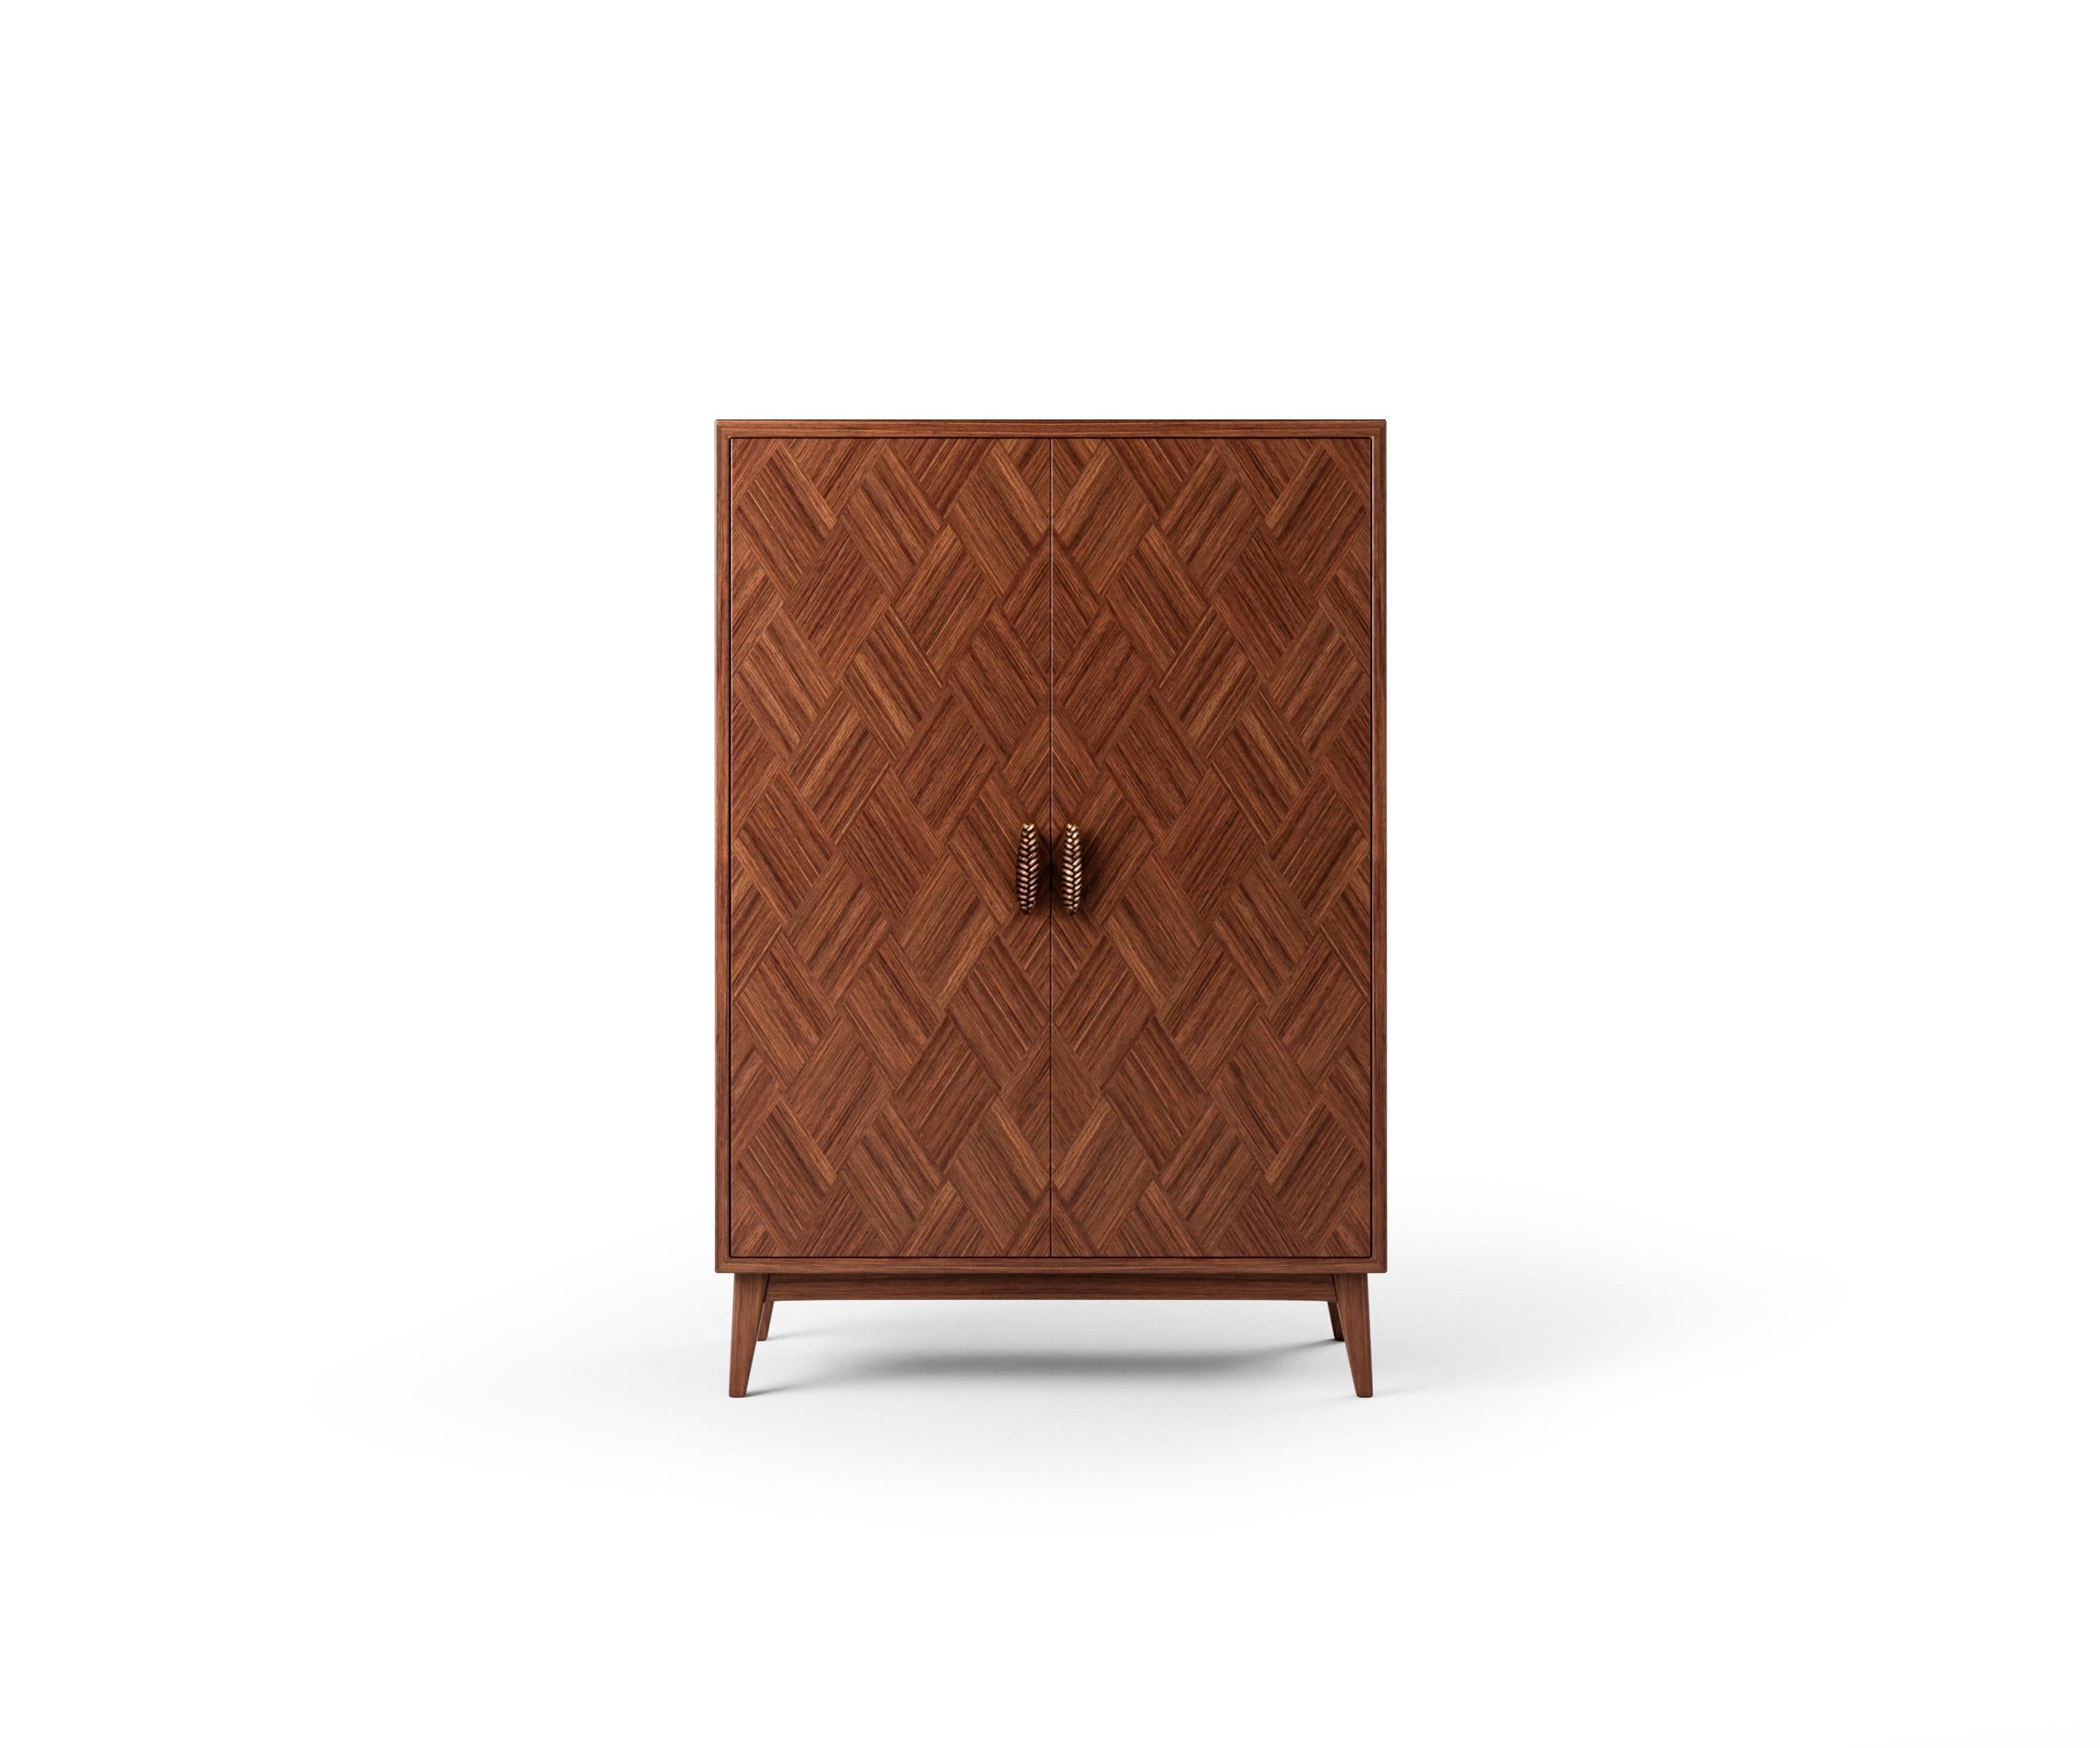 Modern Contemporary Wood Veneer Cabinet with Bronze Handles For Sale